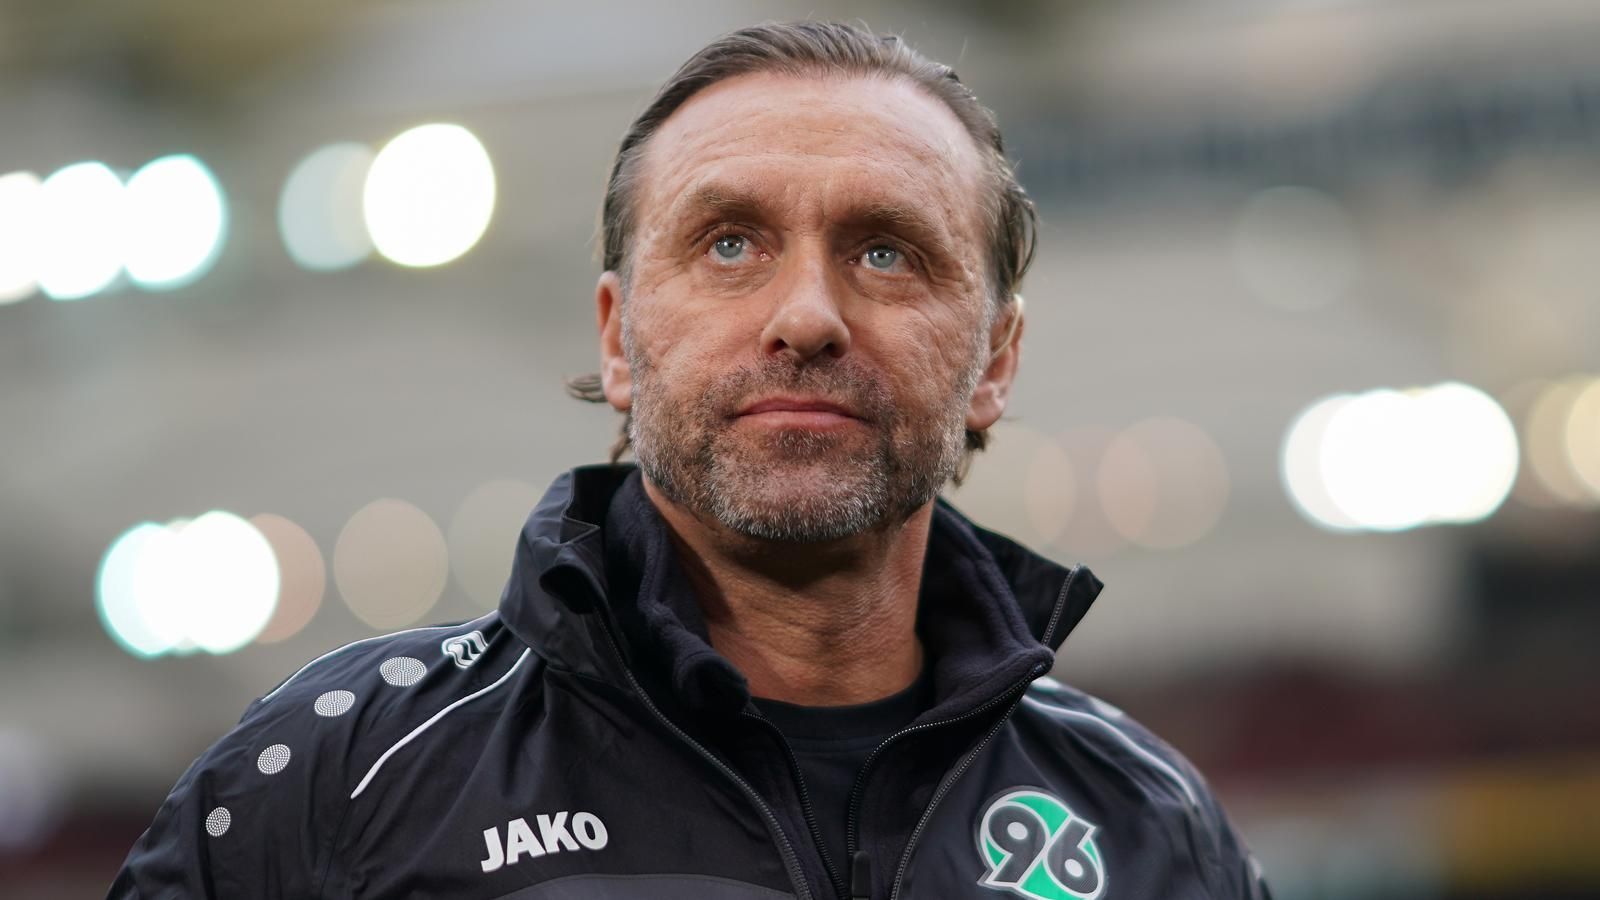 
                <strong>Hannover 96 - Thomas Doll</strong><br>
                Im Amt seit: 27.01.2019Vertrag bis: 30.06.2020
              